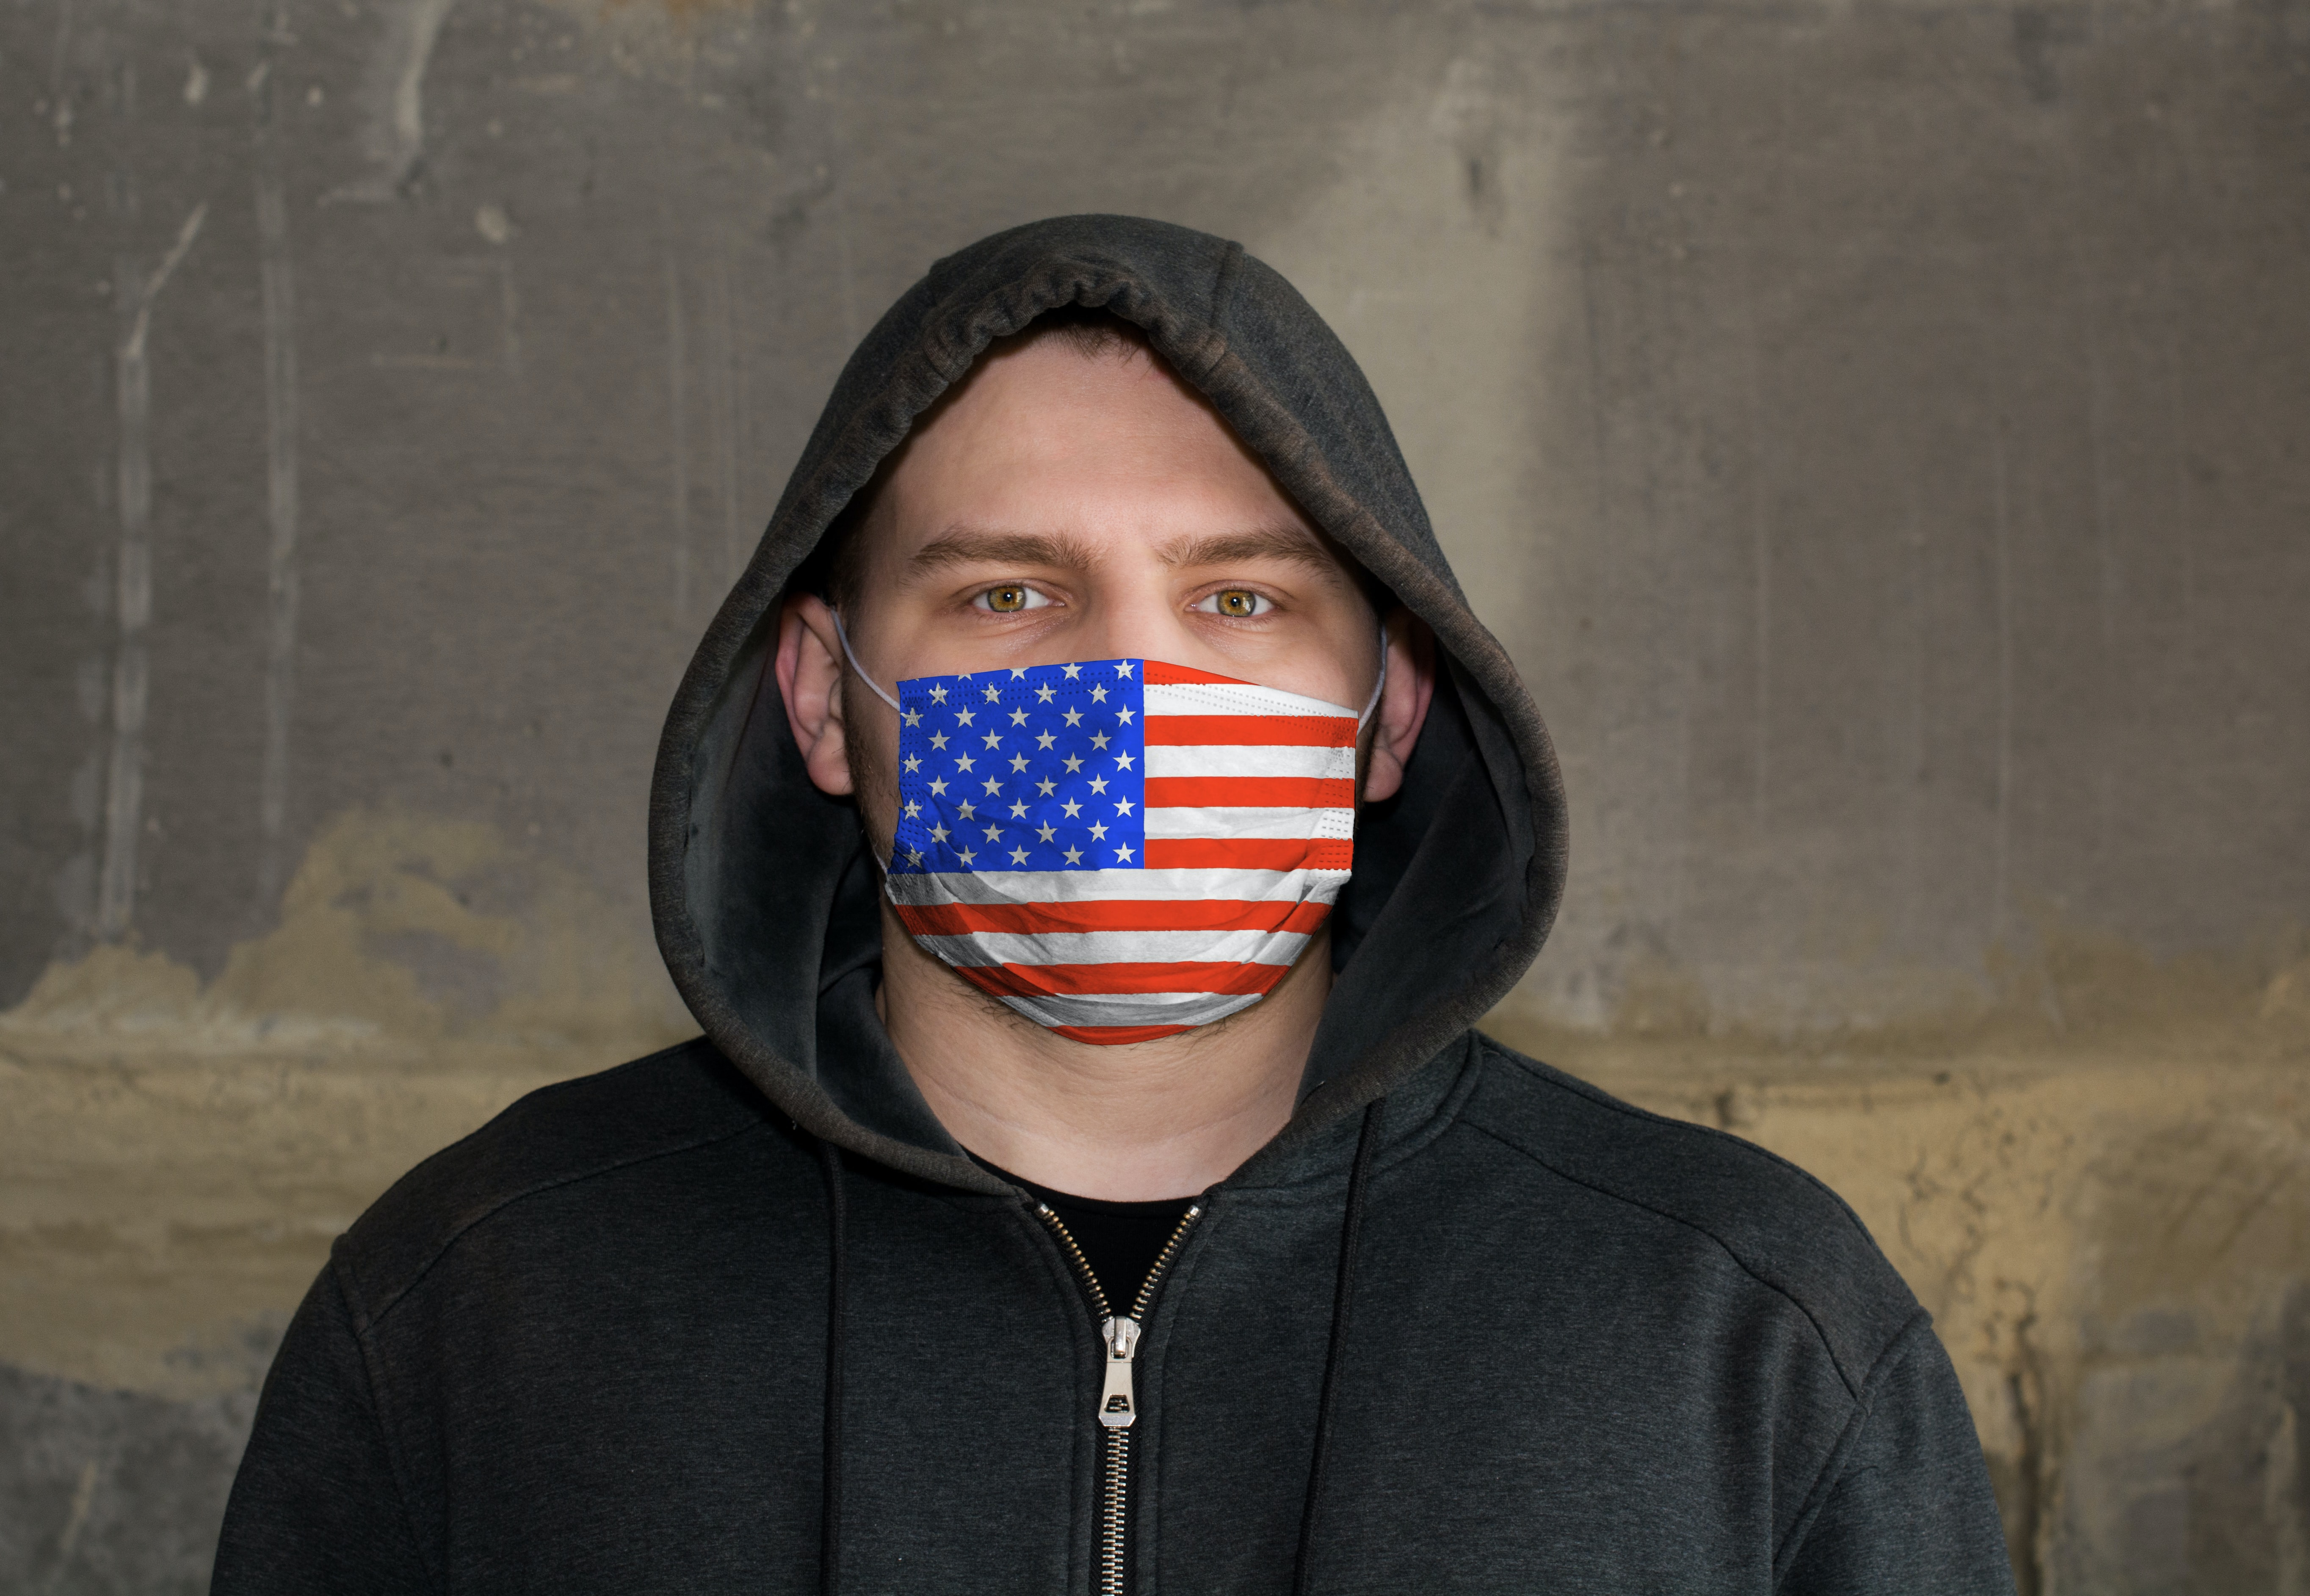 hooded man wearing US Flag mask Identifying Individuals in US Capitol Attack